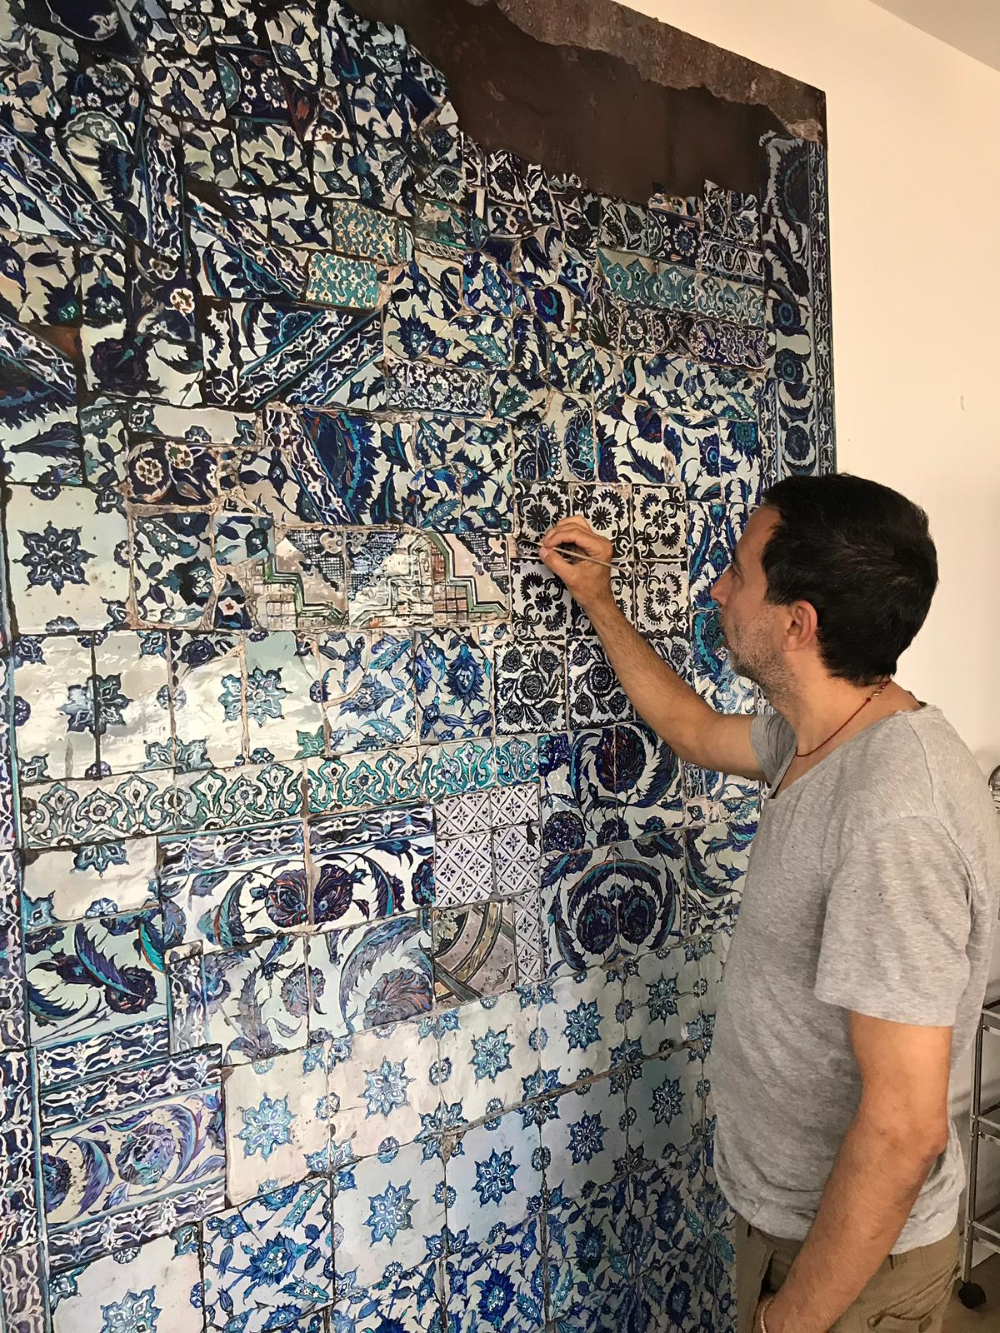 Every little thing counts for a hyper-realist painter like Taner Ceylan. He's shown here working on  'Duvar / The Wall'  (2018, oil on canvas, 240 x 160 cm).